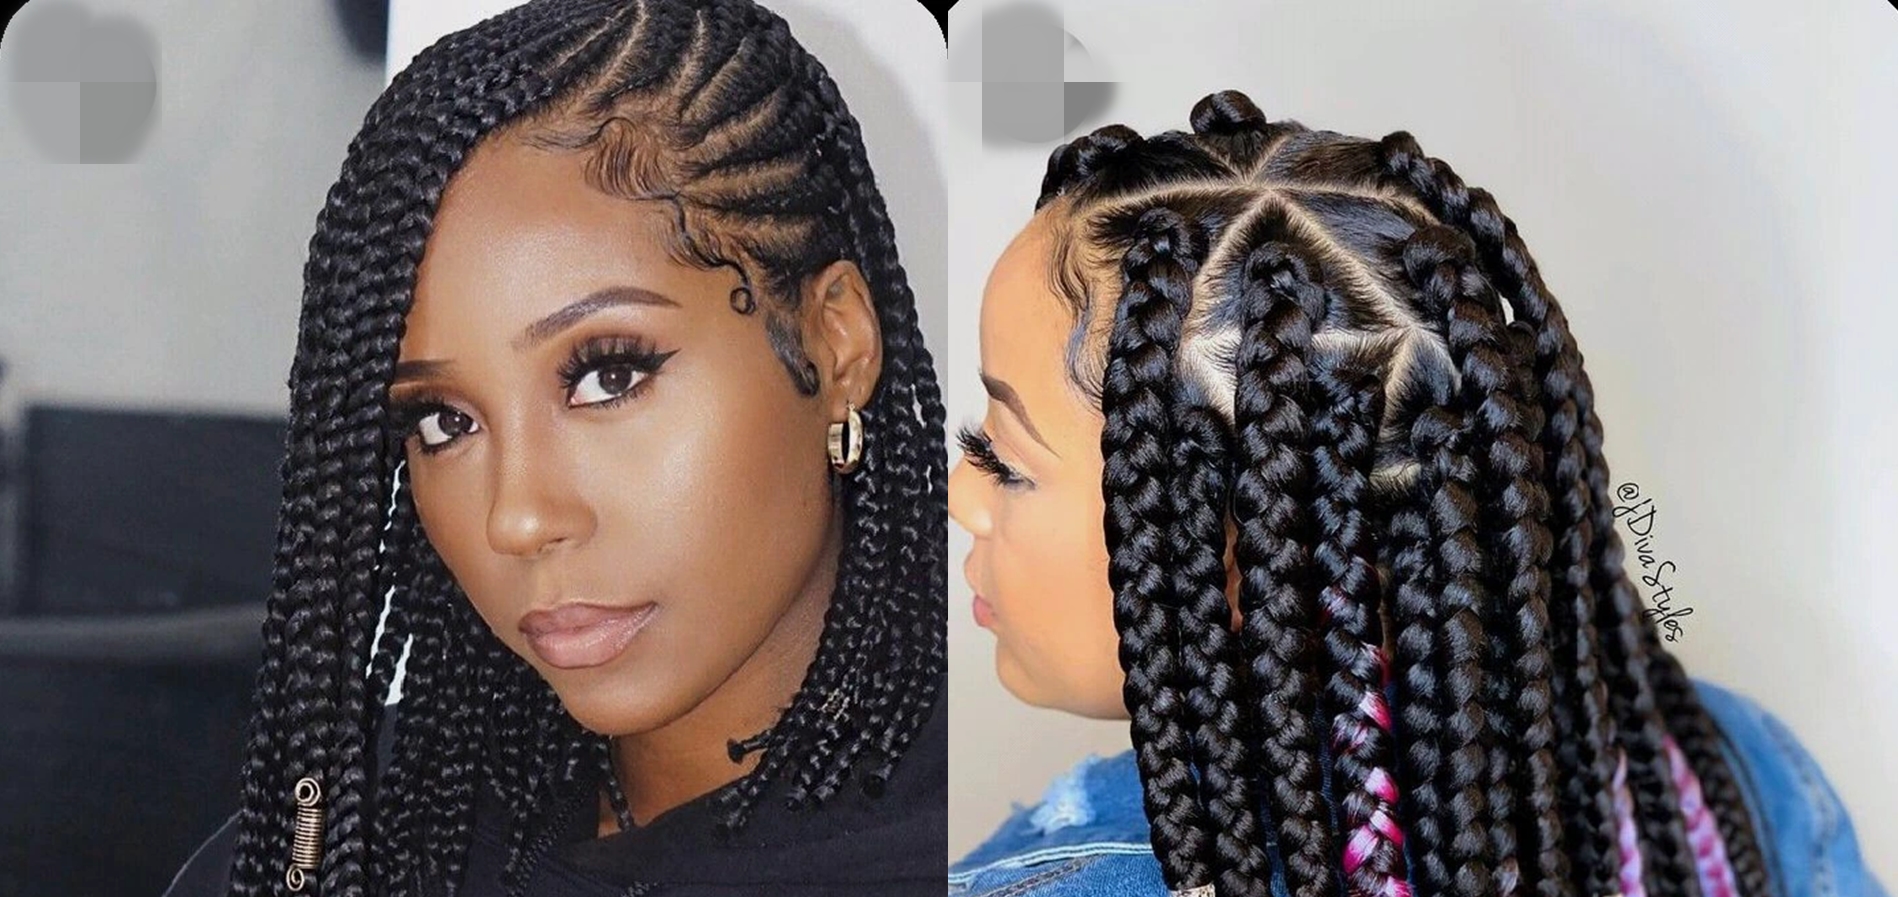 Different Stylish Bob Marley And Twisting Braids You Might Love To Make  This New Month  Vanguard Allure